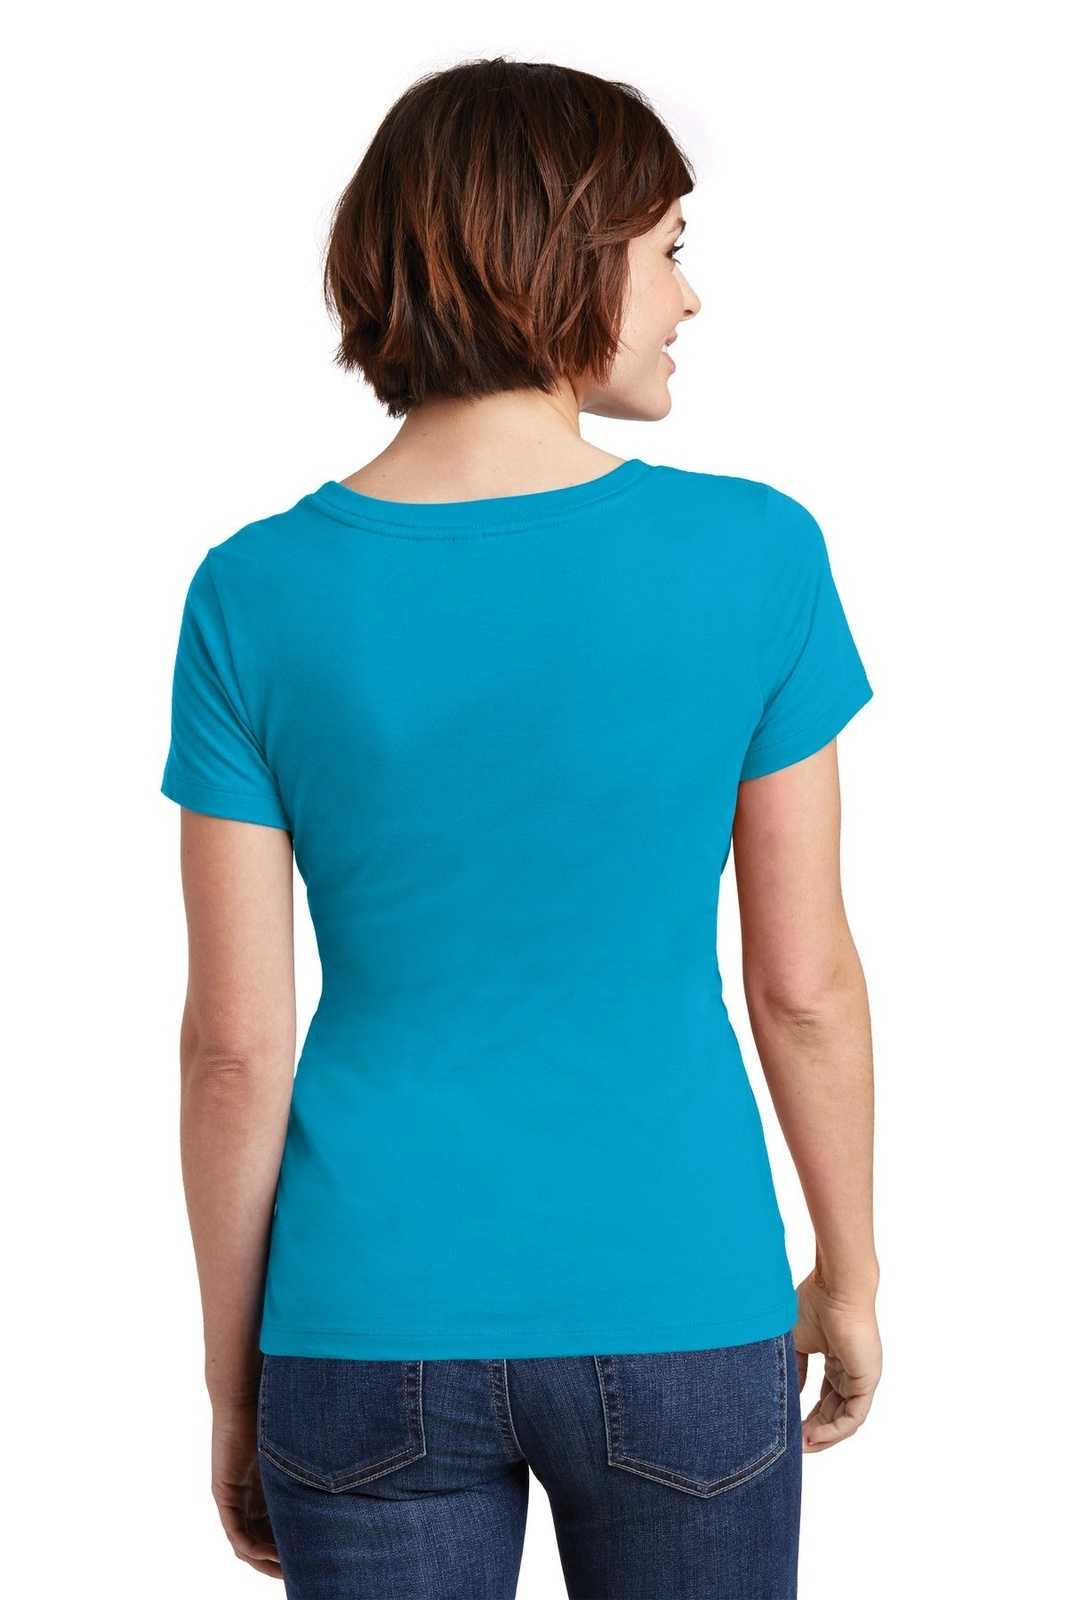 District DM106L Women's Perfect Weight Scoop Tee - Bright Turquoise - HIT a Double - 1